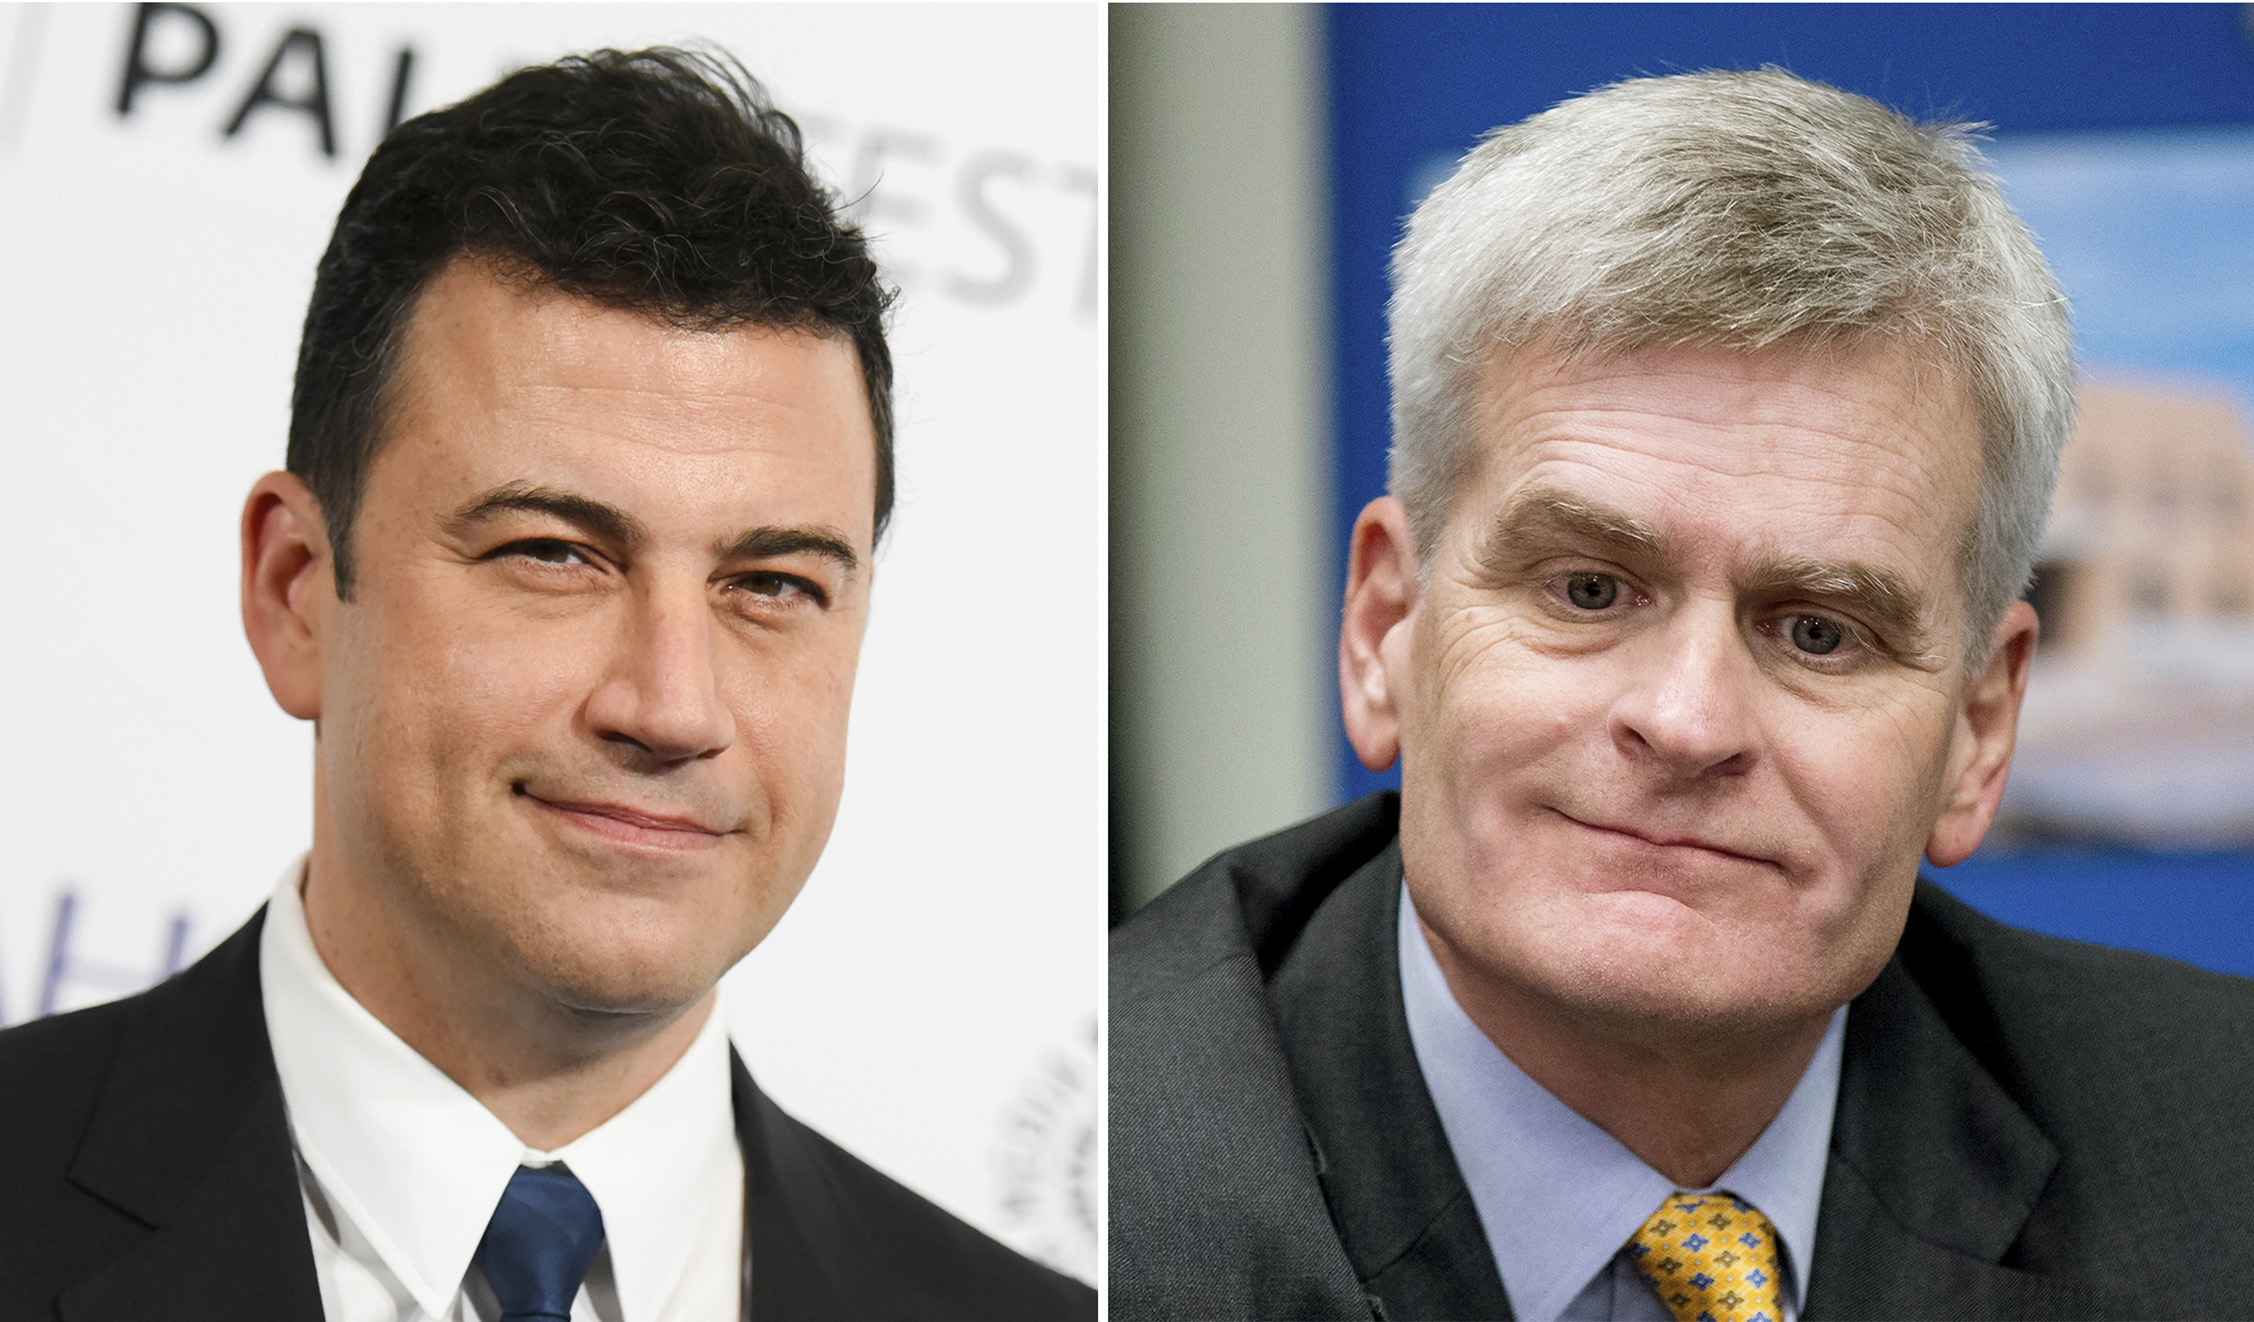 Both Jimmy Kimmel and Bill Cassidy have erred in their ongoing debate ...